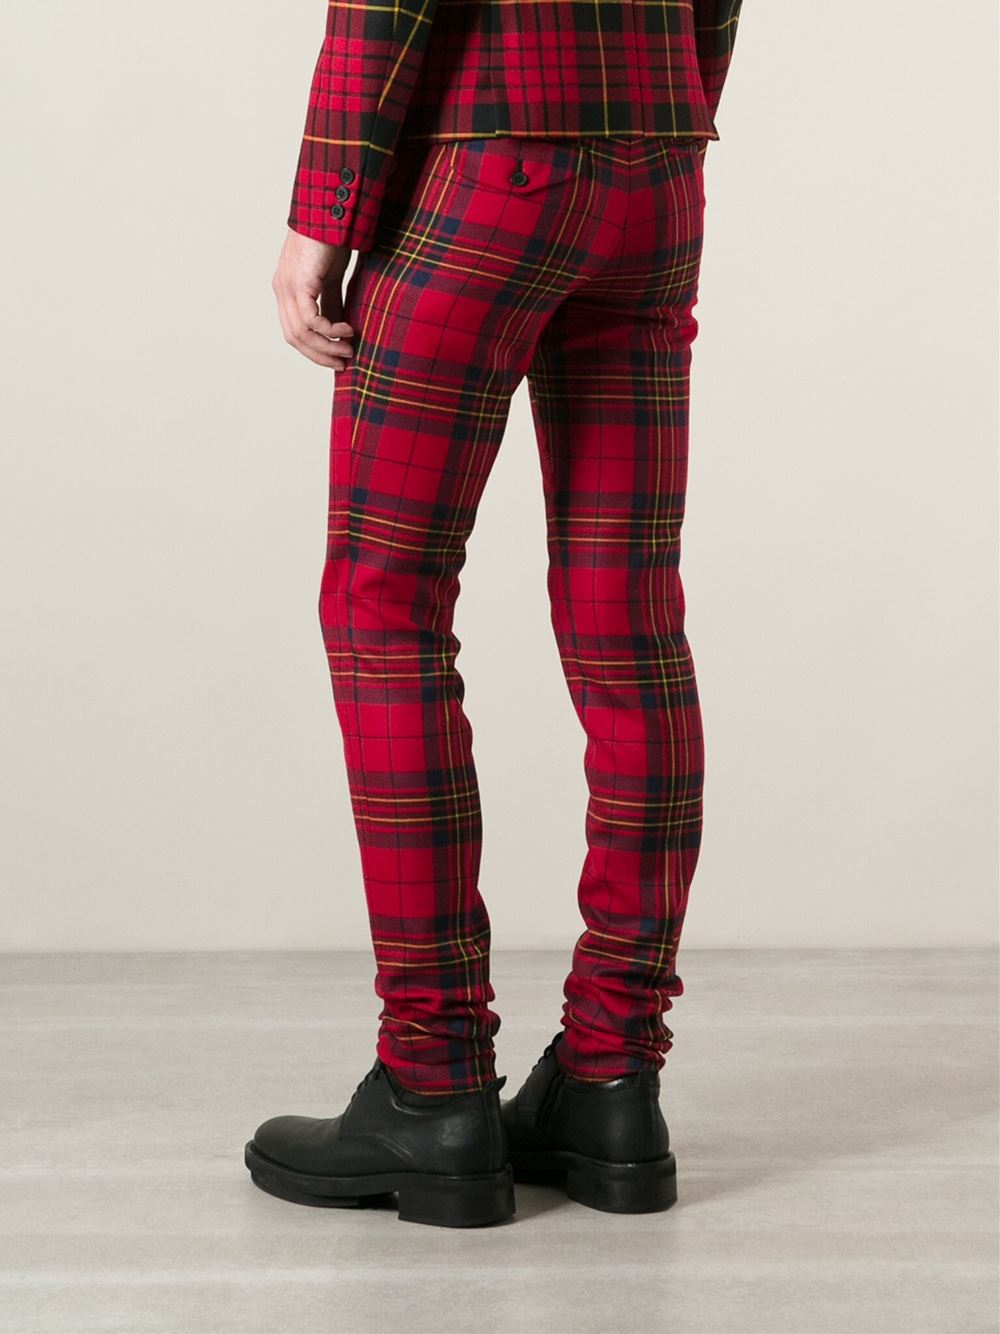 Comme des Garçons Tartan Check Trousers in Red for Men - Lyst